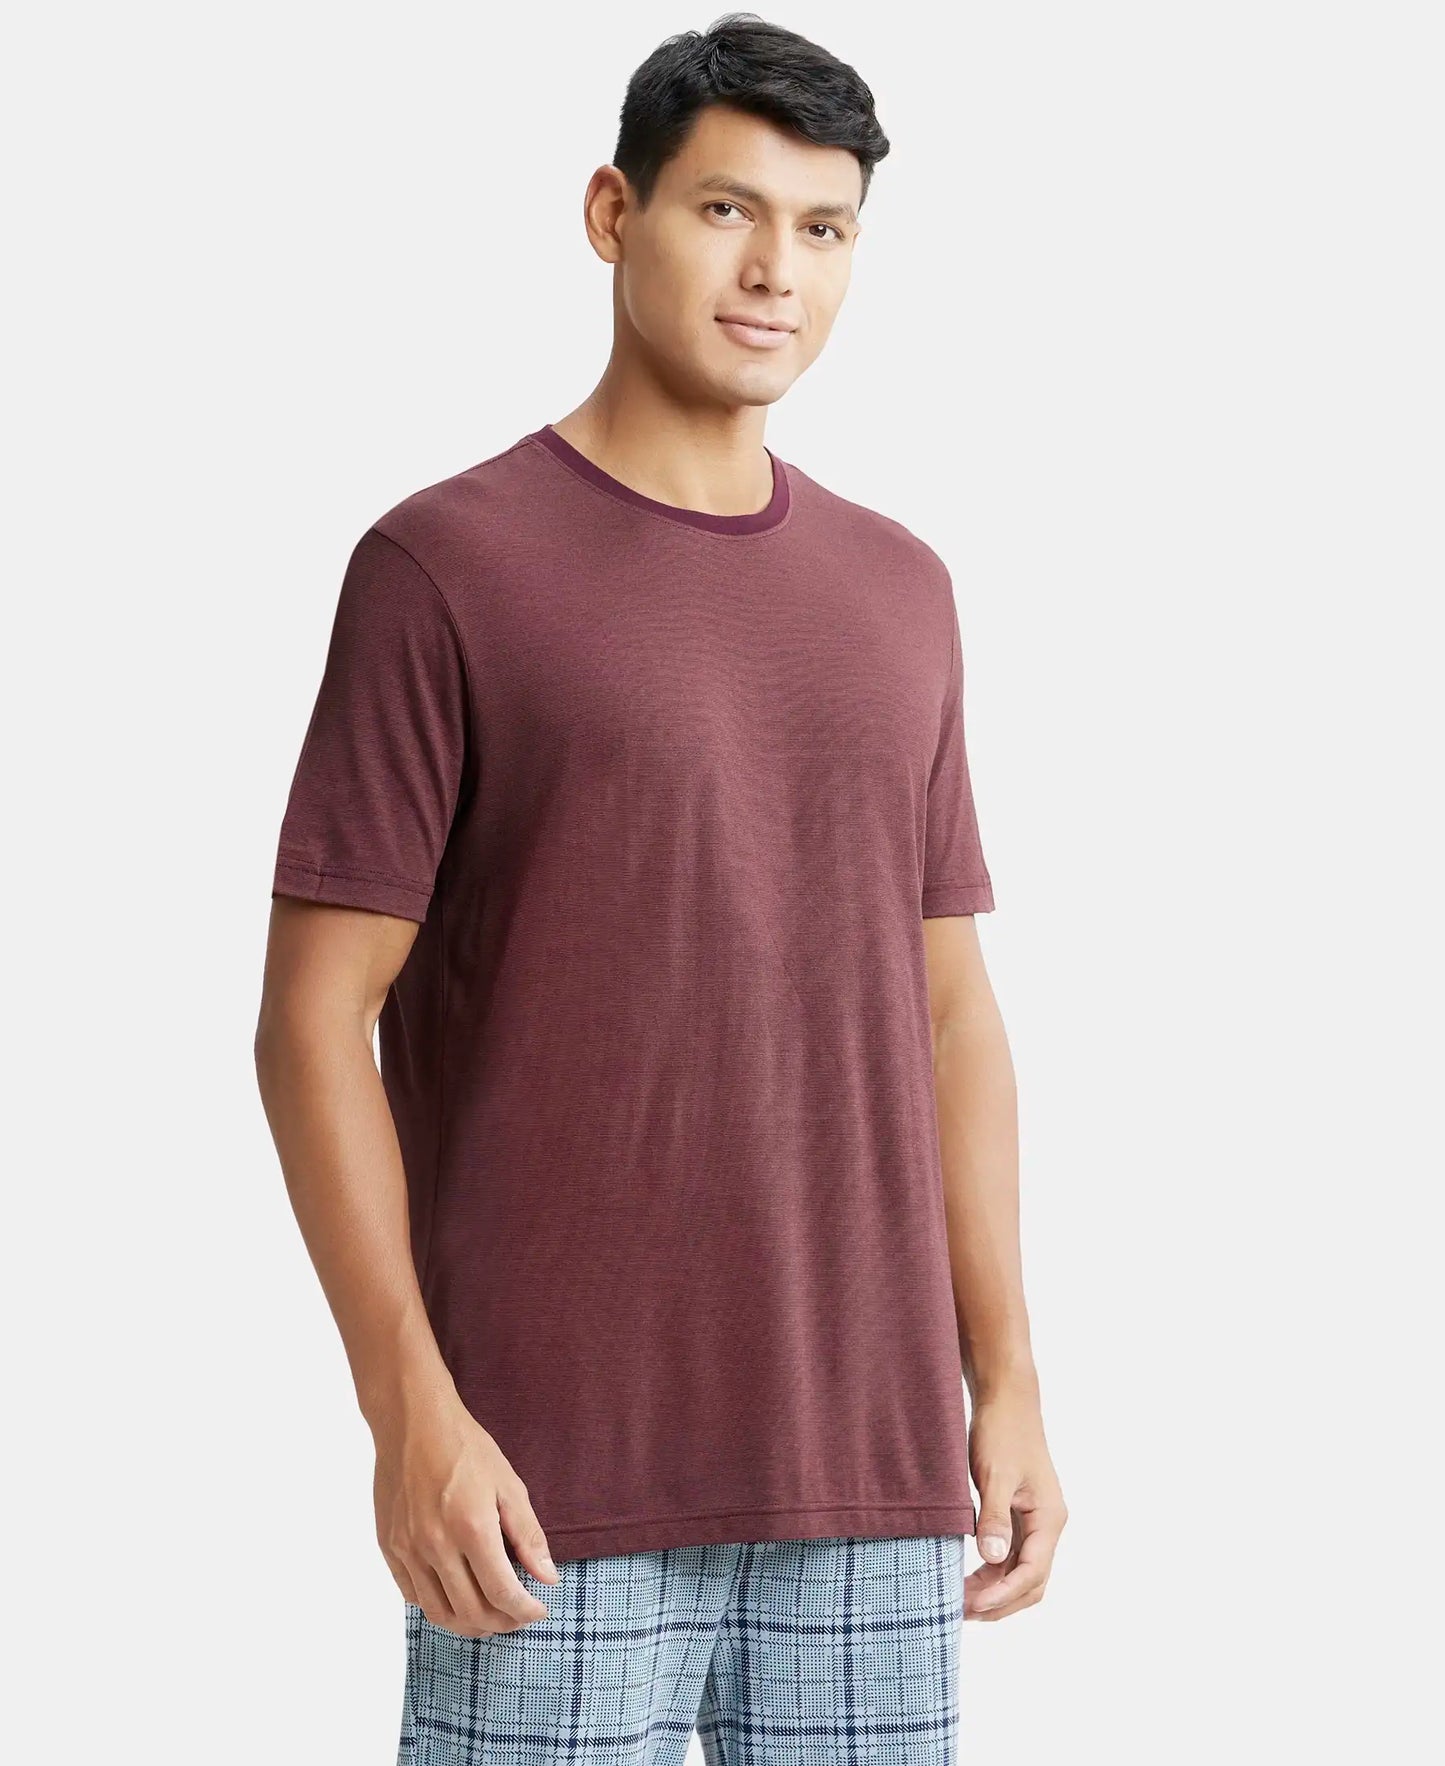 Tencel Micro Modal And Combed Cotton Blend Round Neck Half Sleeve T-Shirt - Wine tasting & Maroon-2